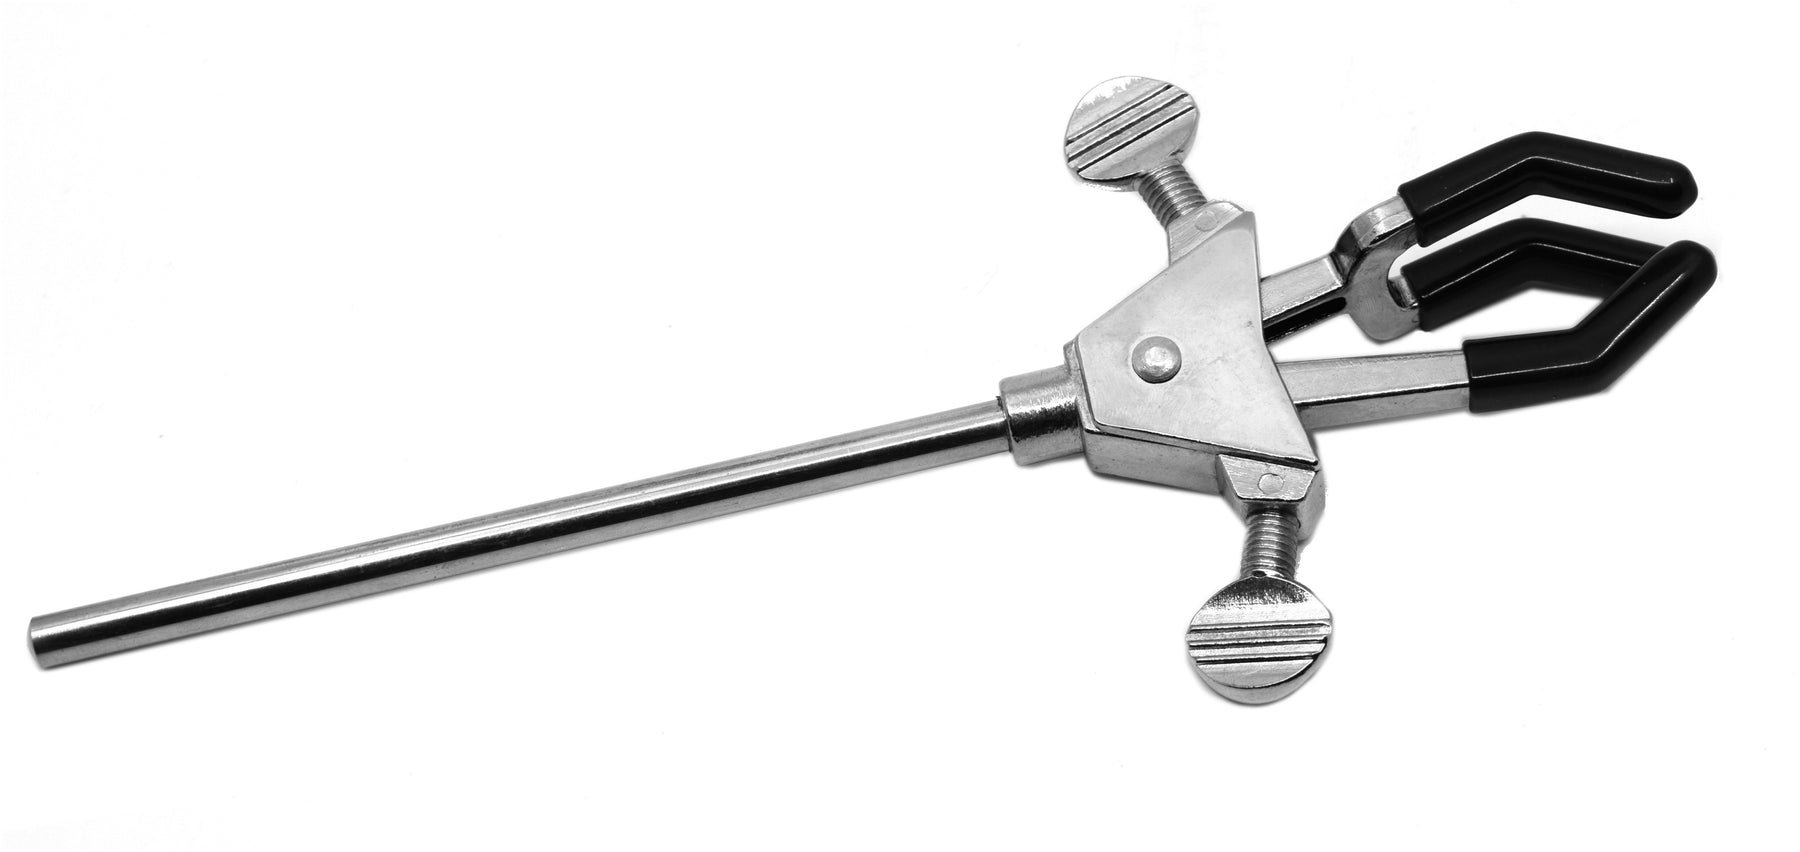 United Scientific™ 3-Prong Universal Clamp with Holder